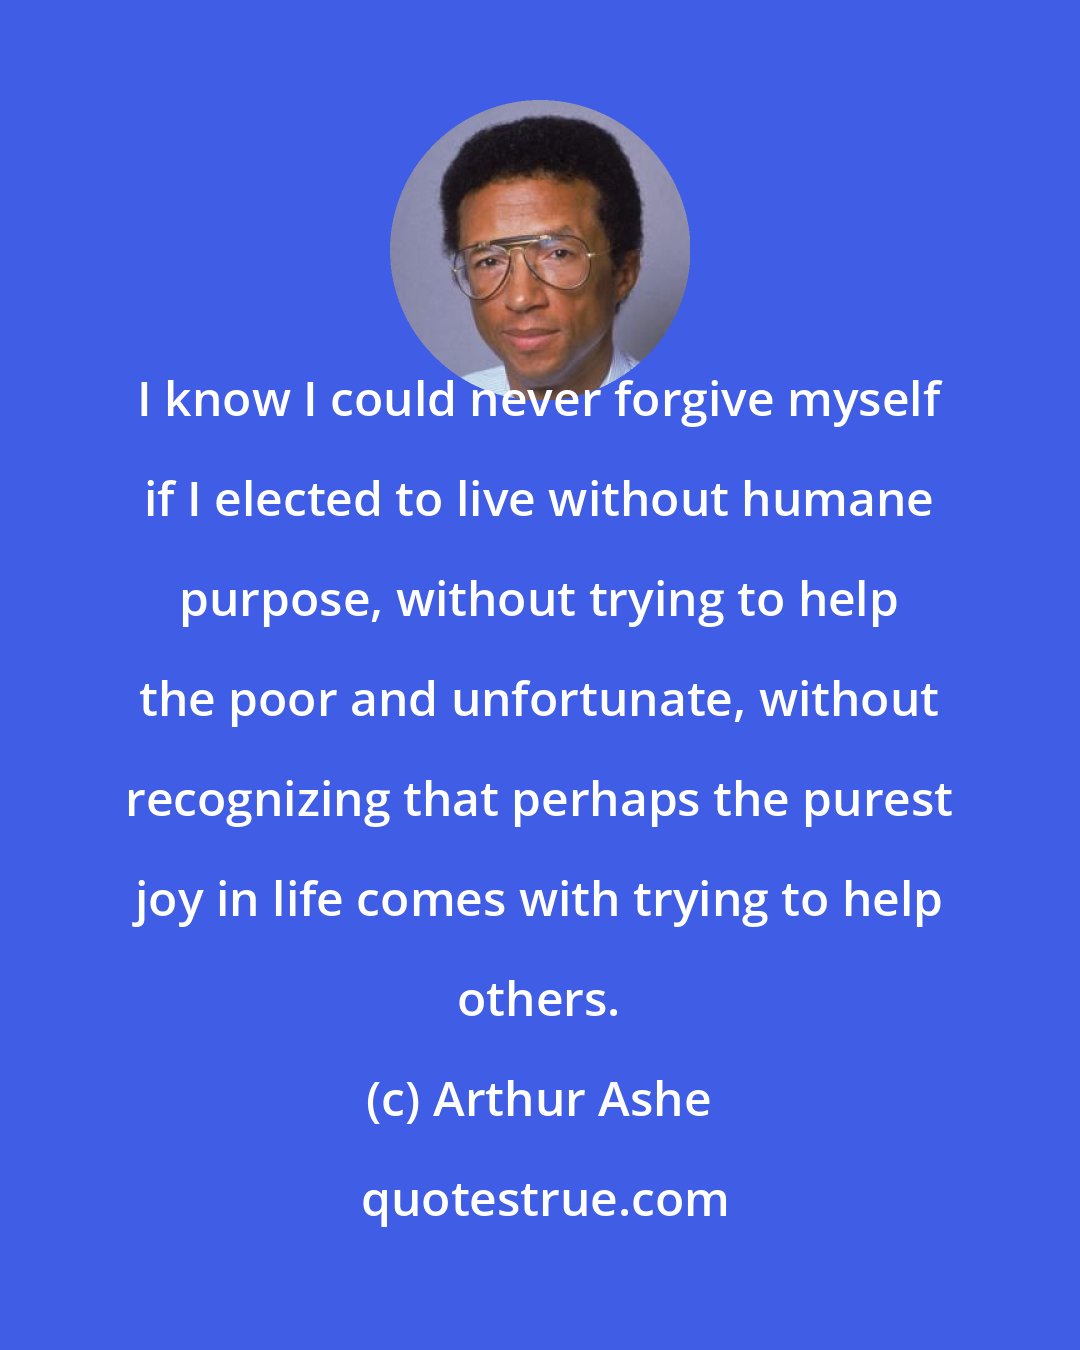 Arthur Ashe: I know I could never forgive myself if I elected to live without humane purpose, without trying to help the poor and unfortunate, without recognizing that perhaps the purest joy in life comes with trying to help others.